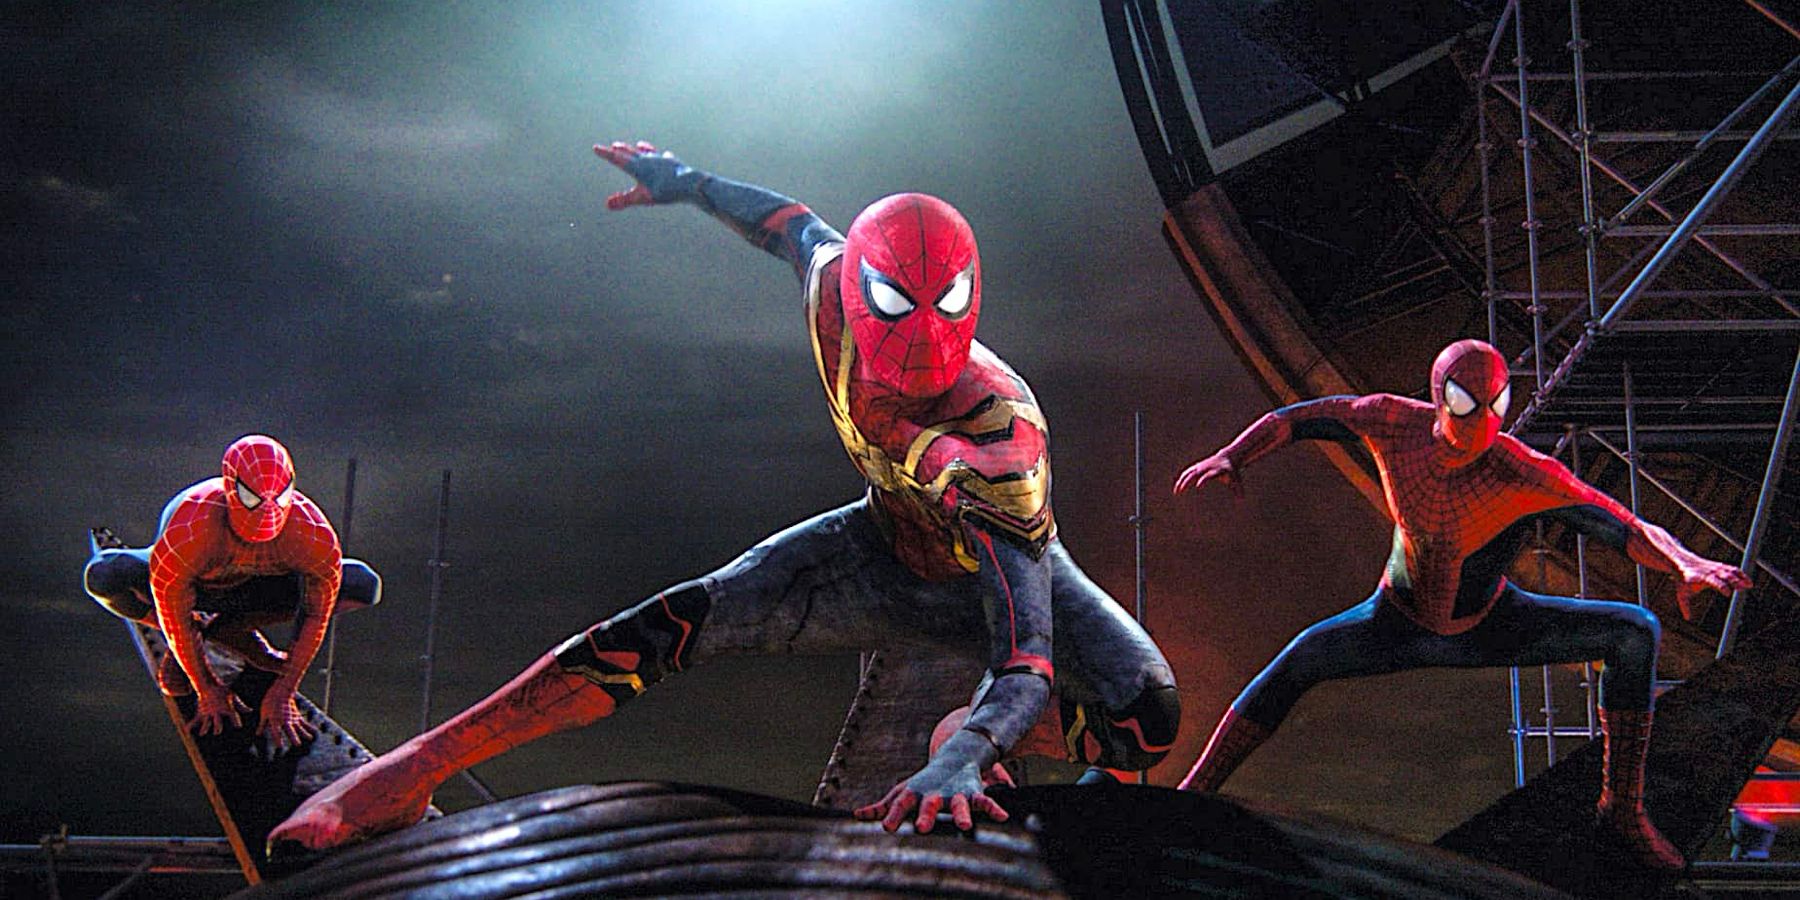 Spider-Man of the MCU (Tom Holland) teams-up with Tobey Maguire and Andrew Garfield’s variants of the character atop the Statue of Liberty in Spider-Man: No Way Home.